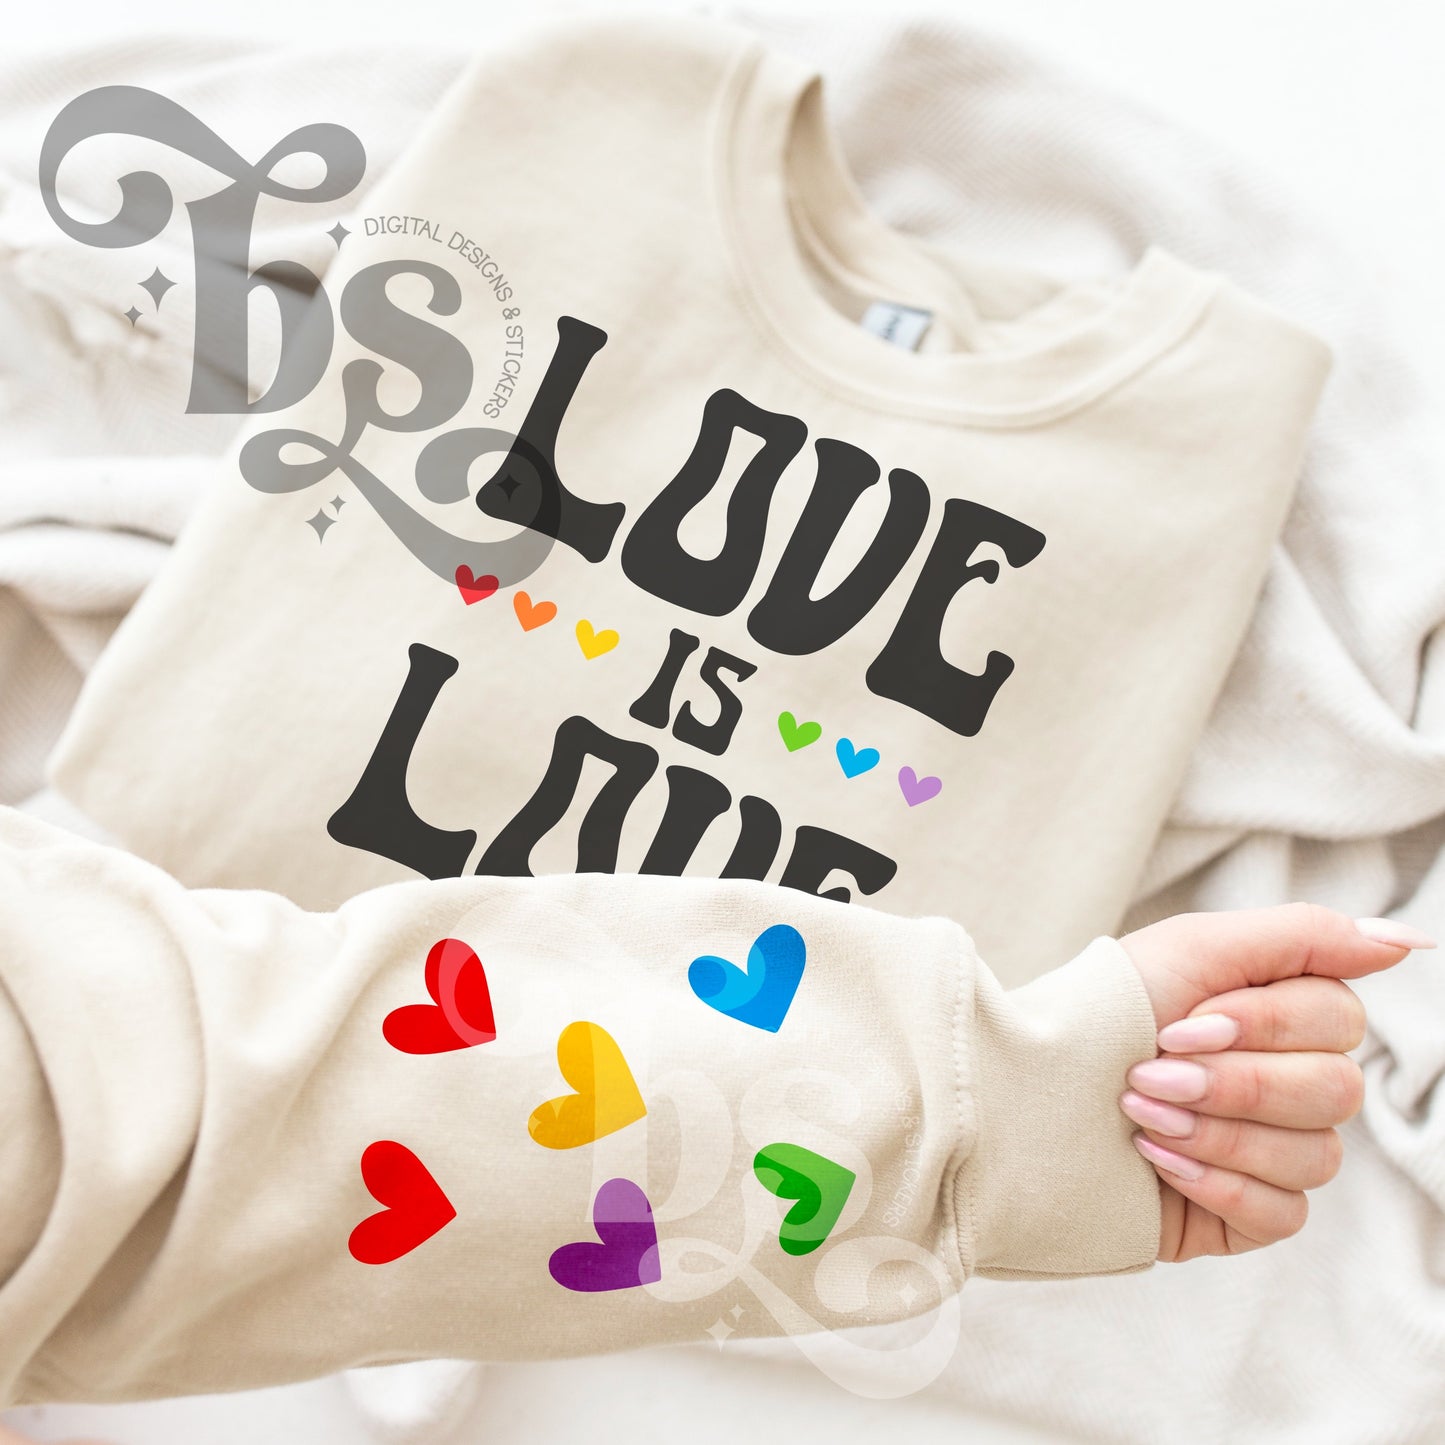 Love is love -with sleeve design